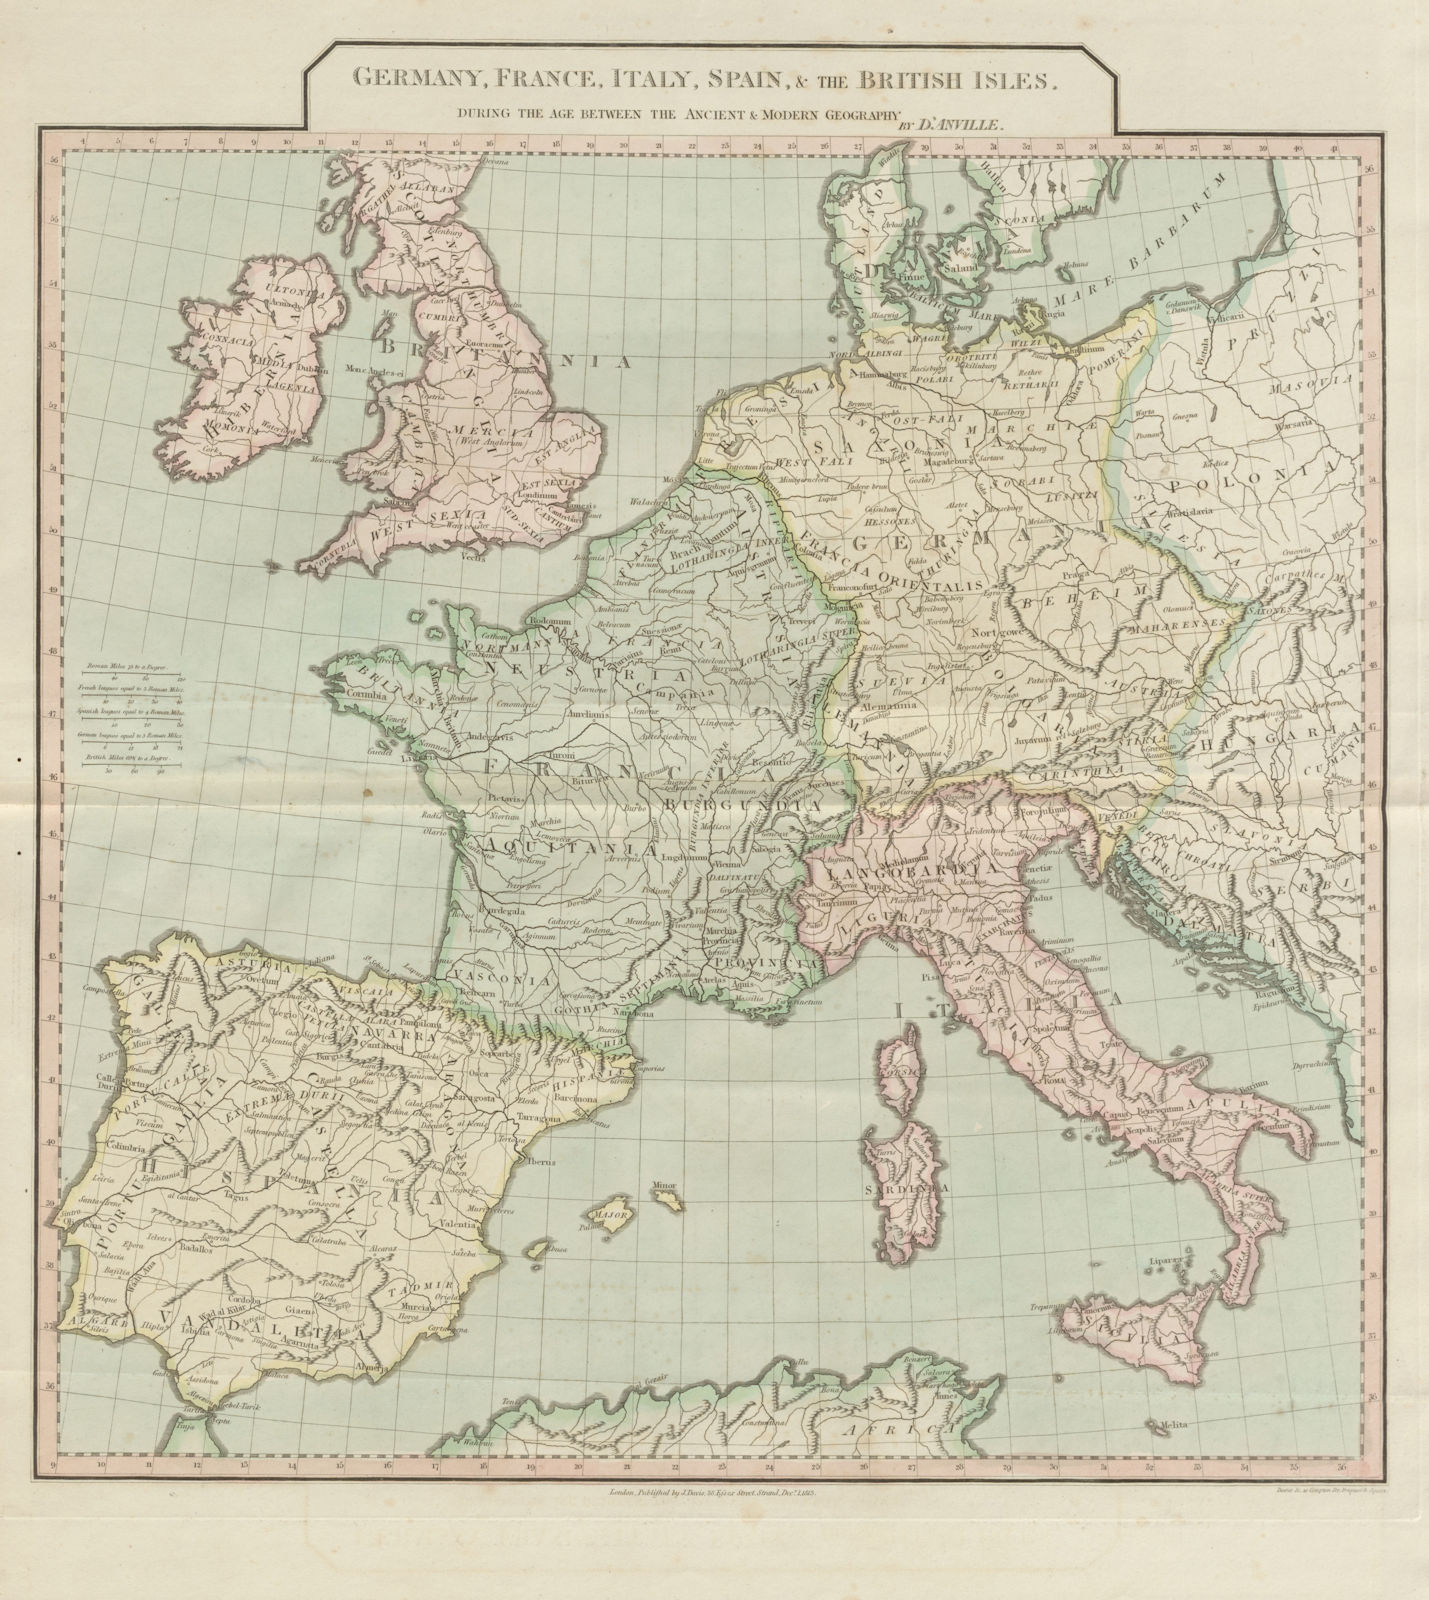 Western Europe "between the Ancient and Modern Geography". D'ANVILLE 1815 map